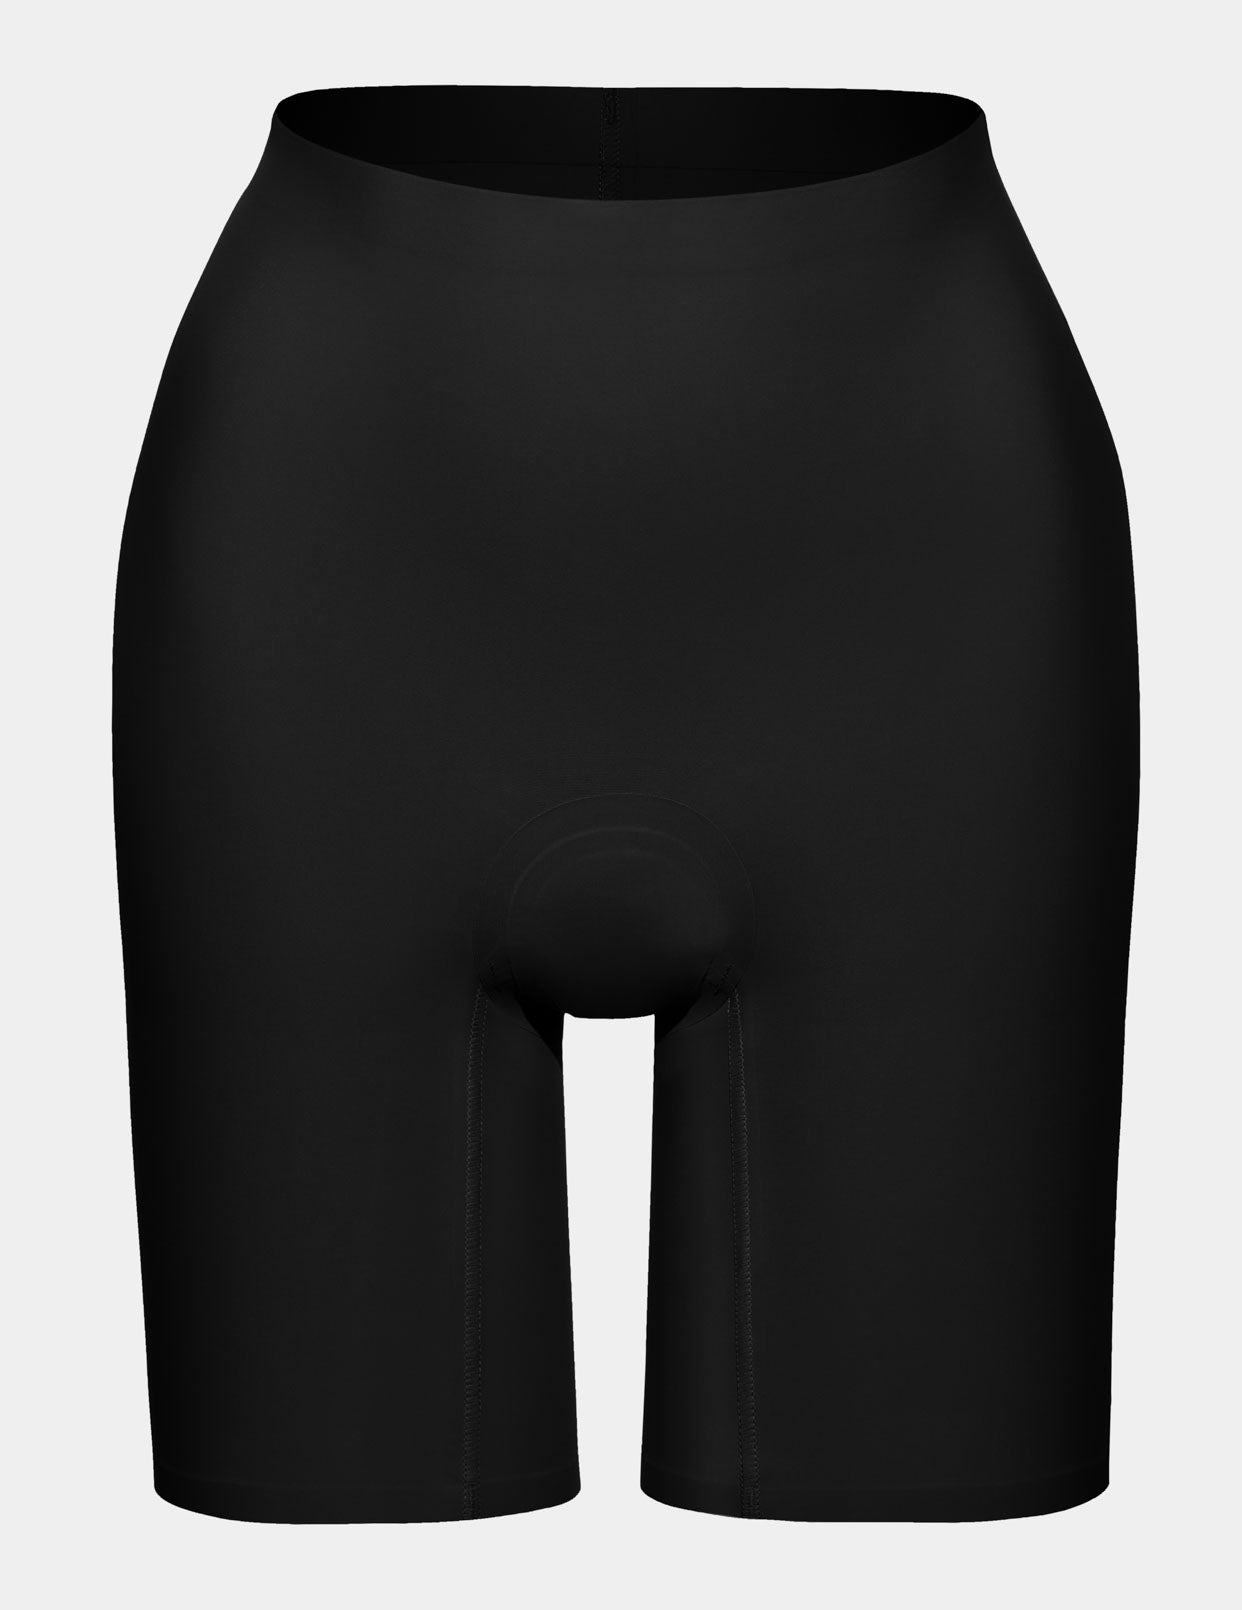 Thigh Saver Short: Teacher's Best Friend, Teachers 🍎 give it an A+  Lightweight. Breathable. Stops Thigh Rub. And protects your modesty if it's  a windy day., By Knix